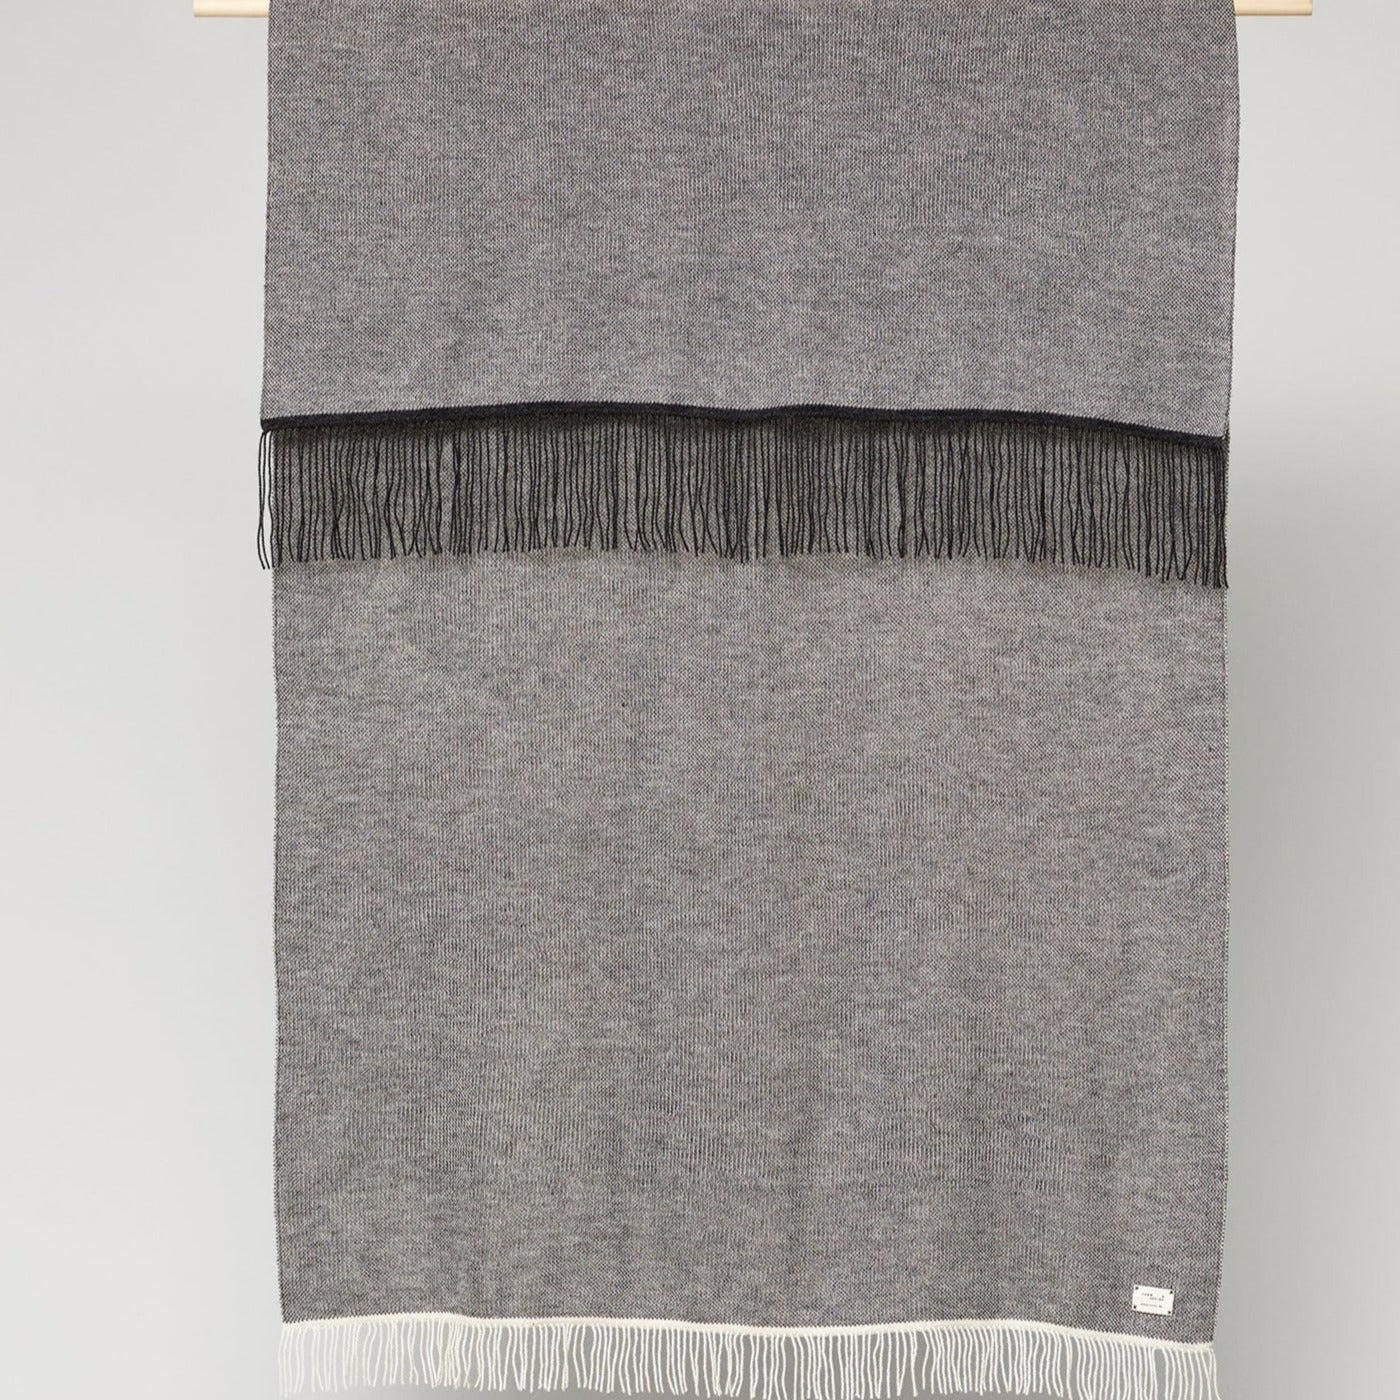 AYMARA Plaids grey with tassels black and white-front view